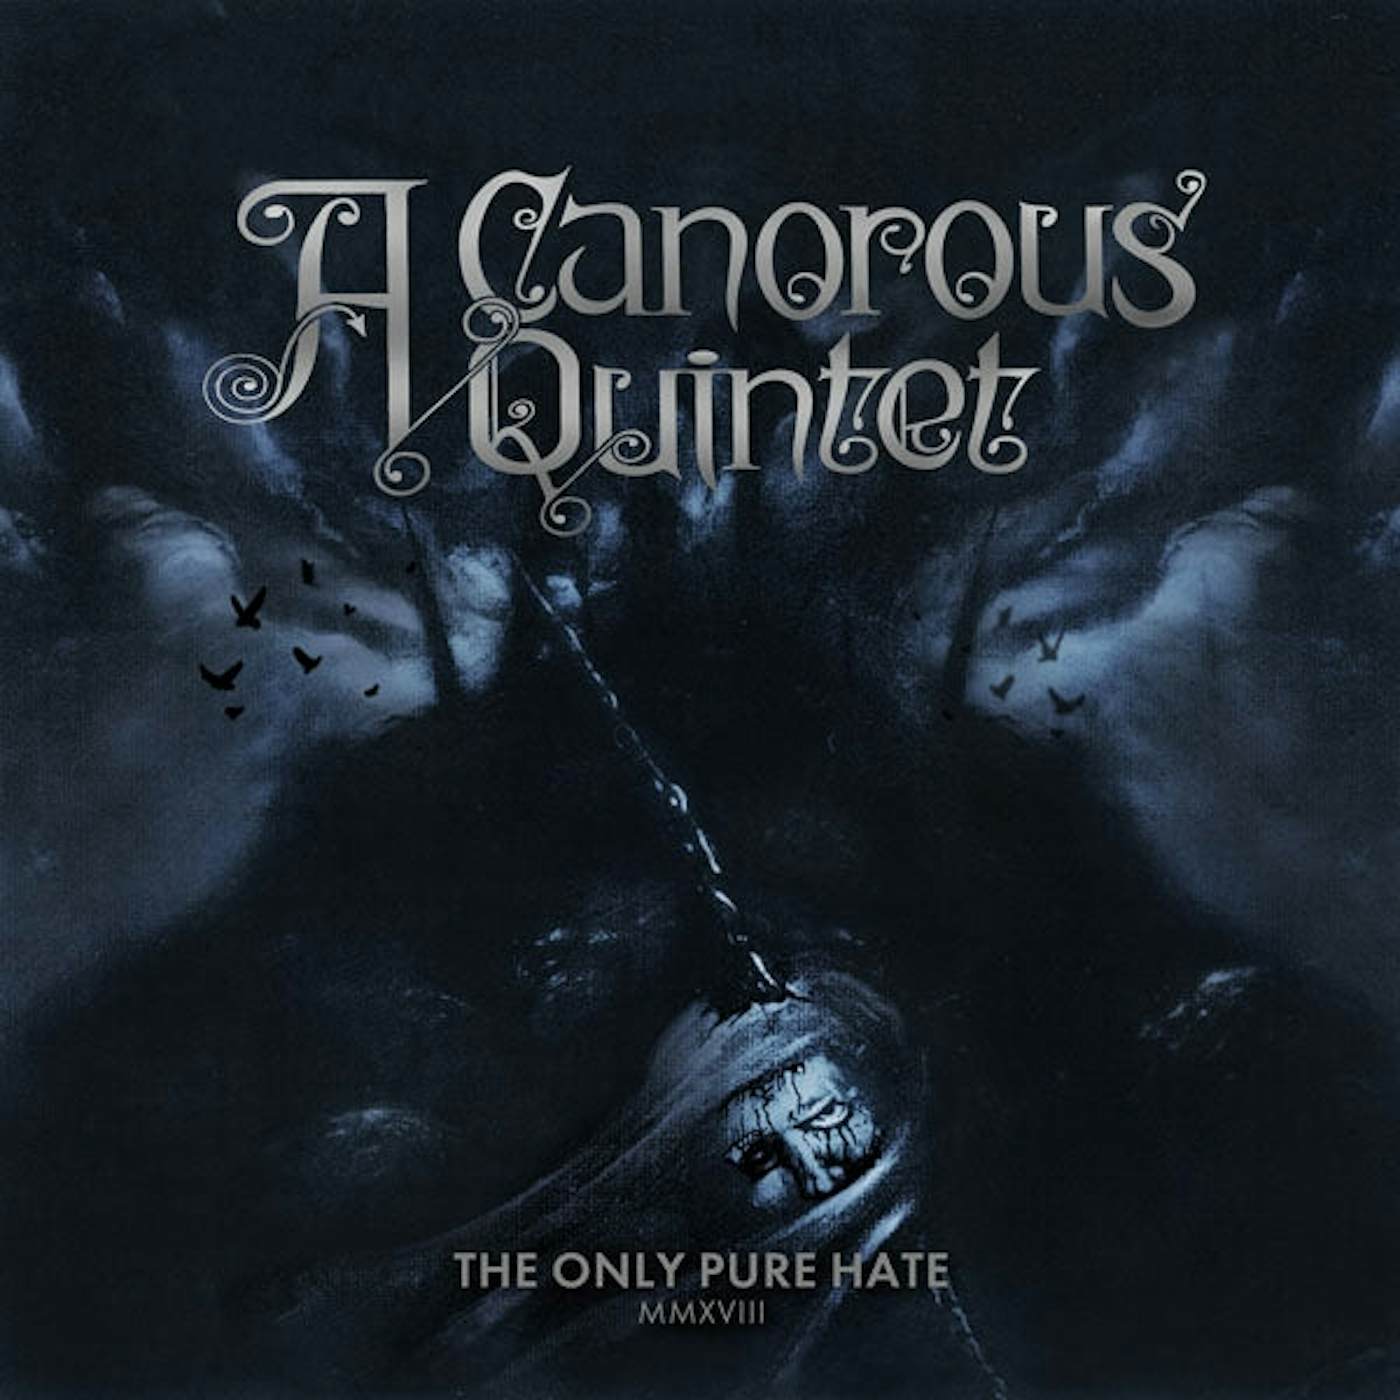 A Canorous Quintet LP - The Only Pure Hate -Mmxviii- (Vinyl)